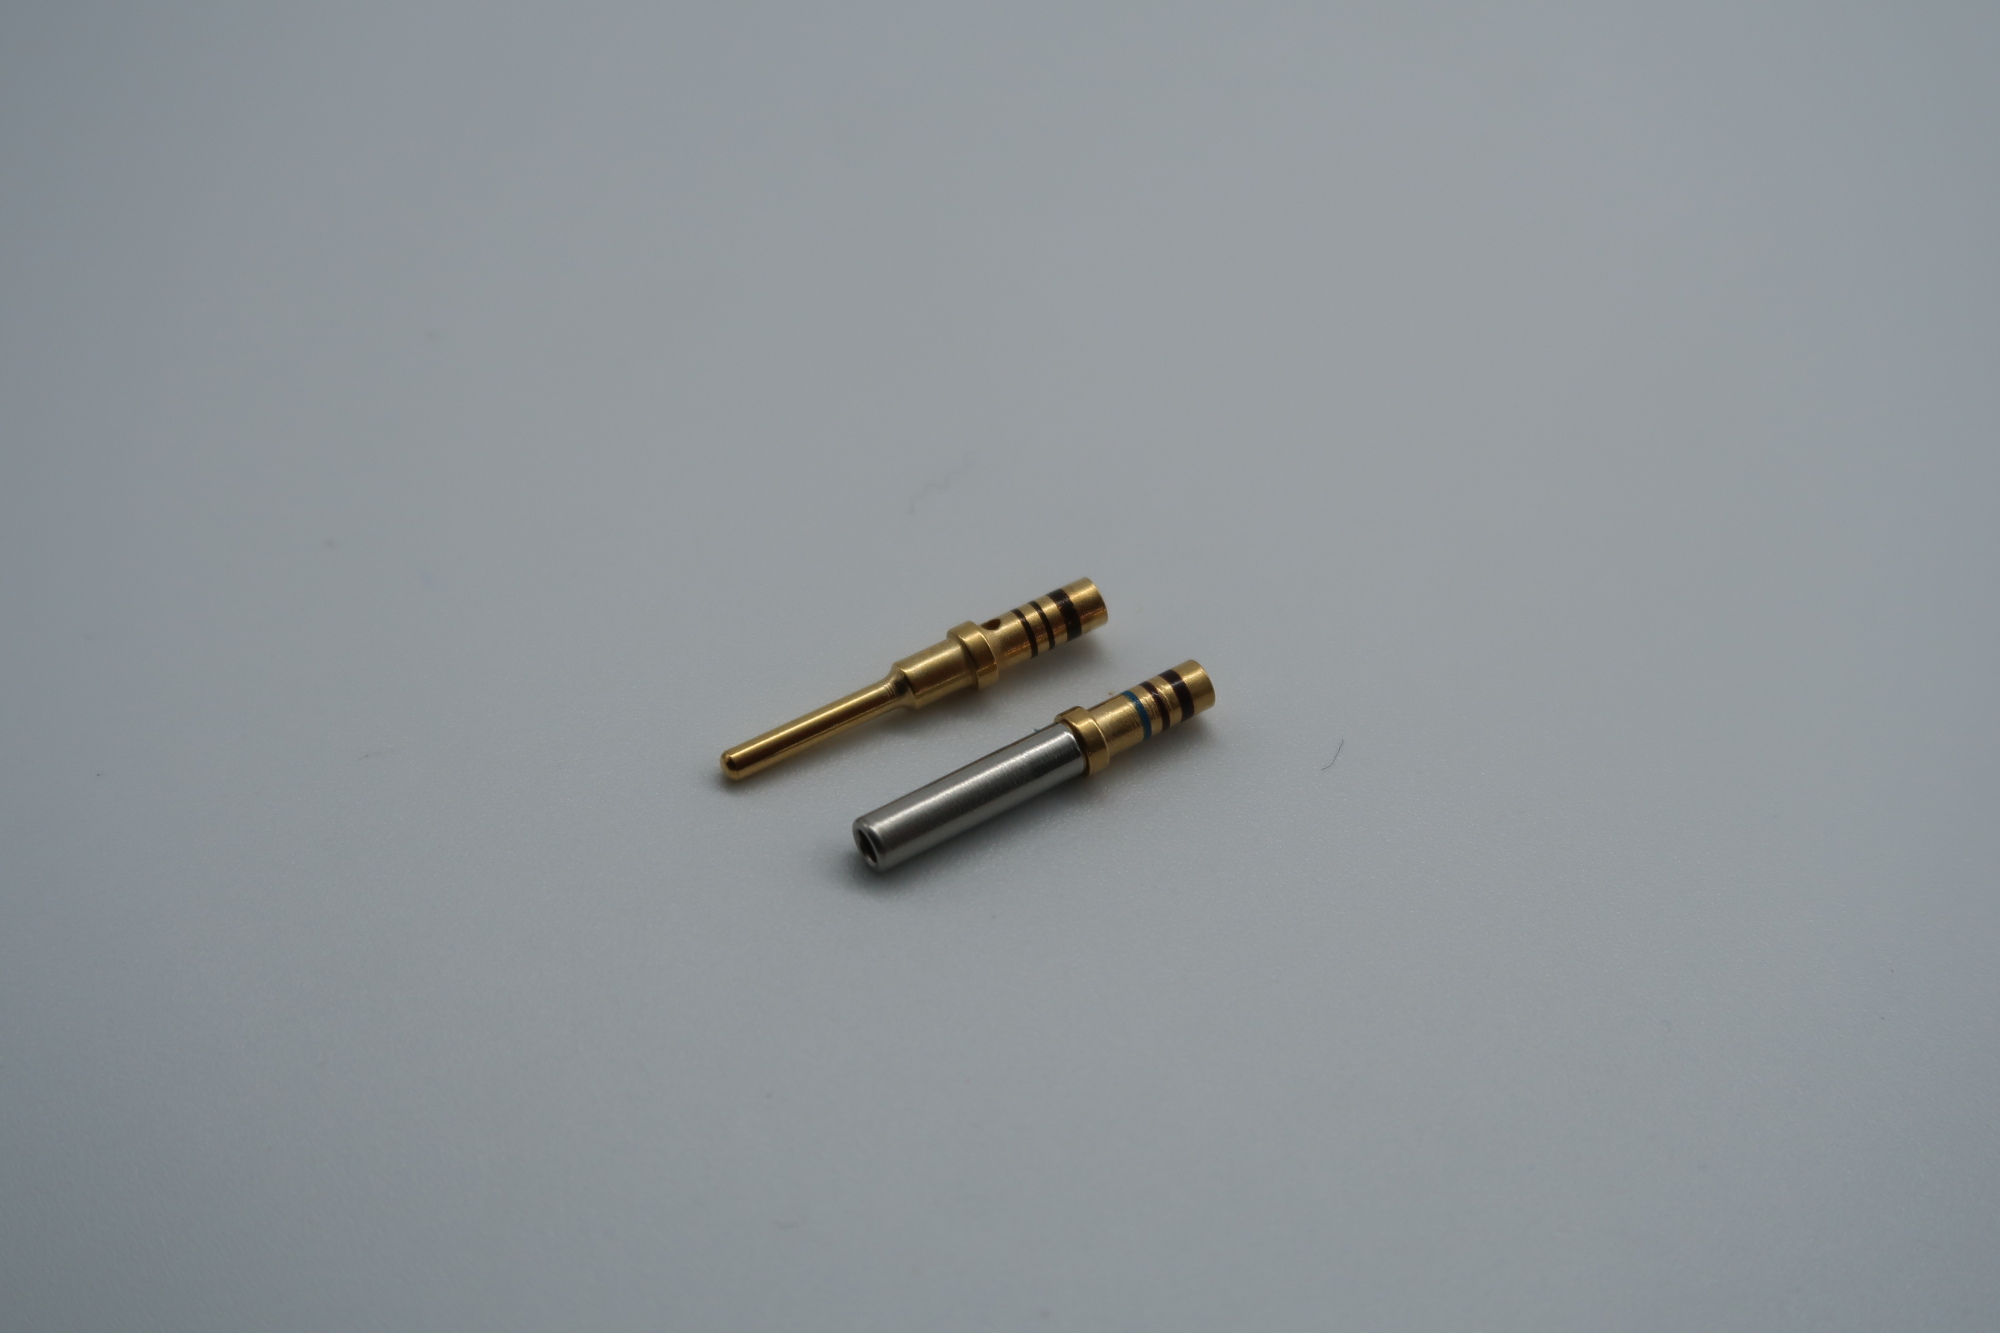 DT GOLD PINS AND SOCKETS (100 PACK)